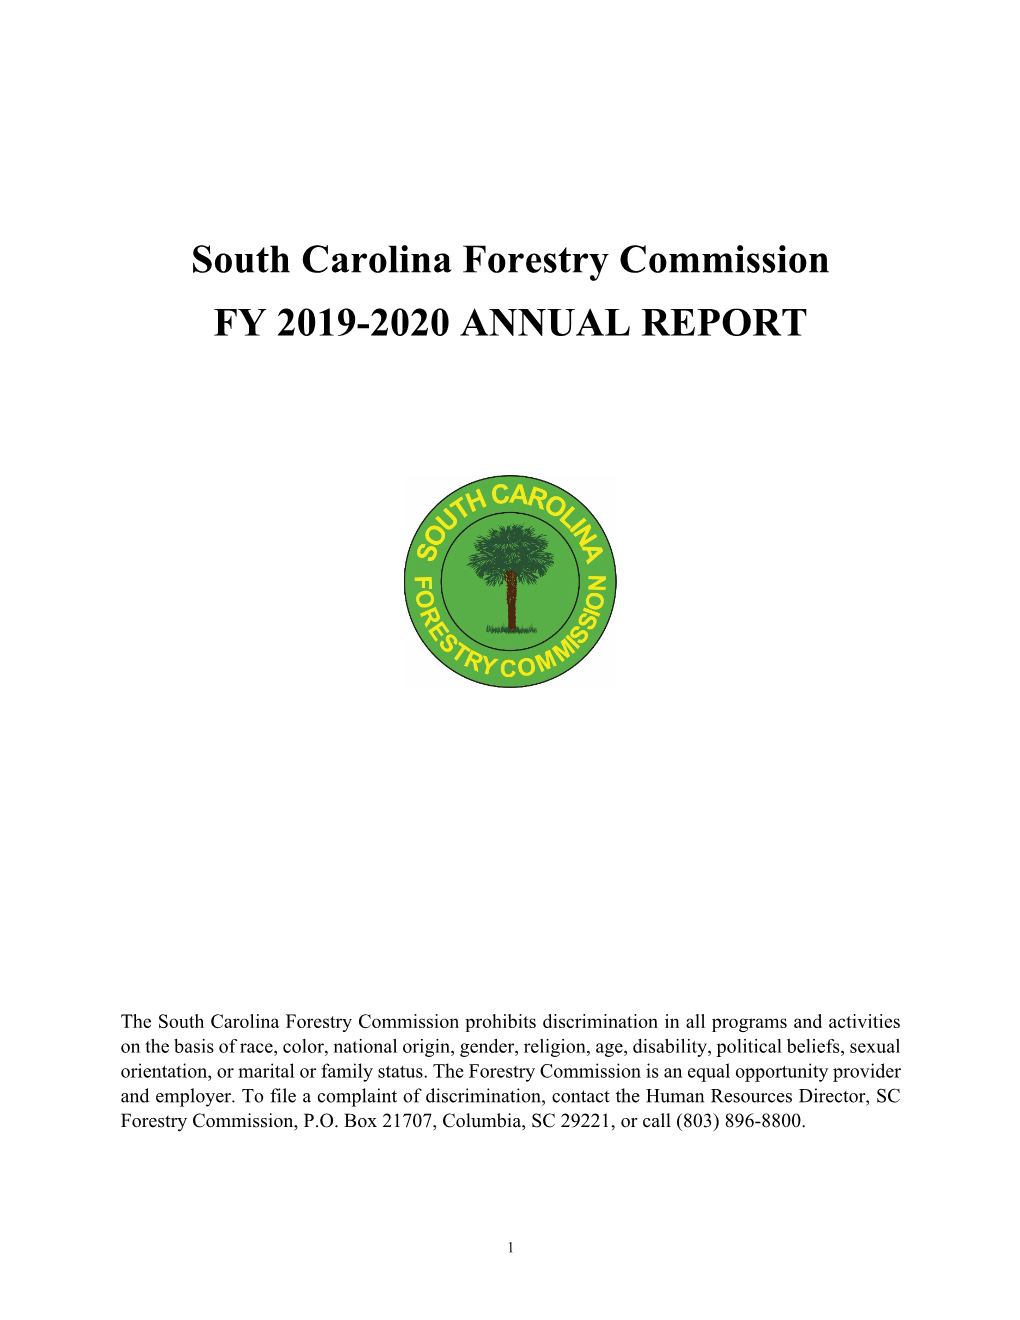 South Carolina Forestry Commission FY 2019-2020 ANNUAL REPORT